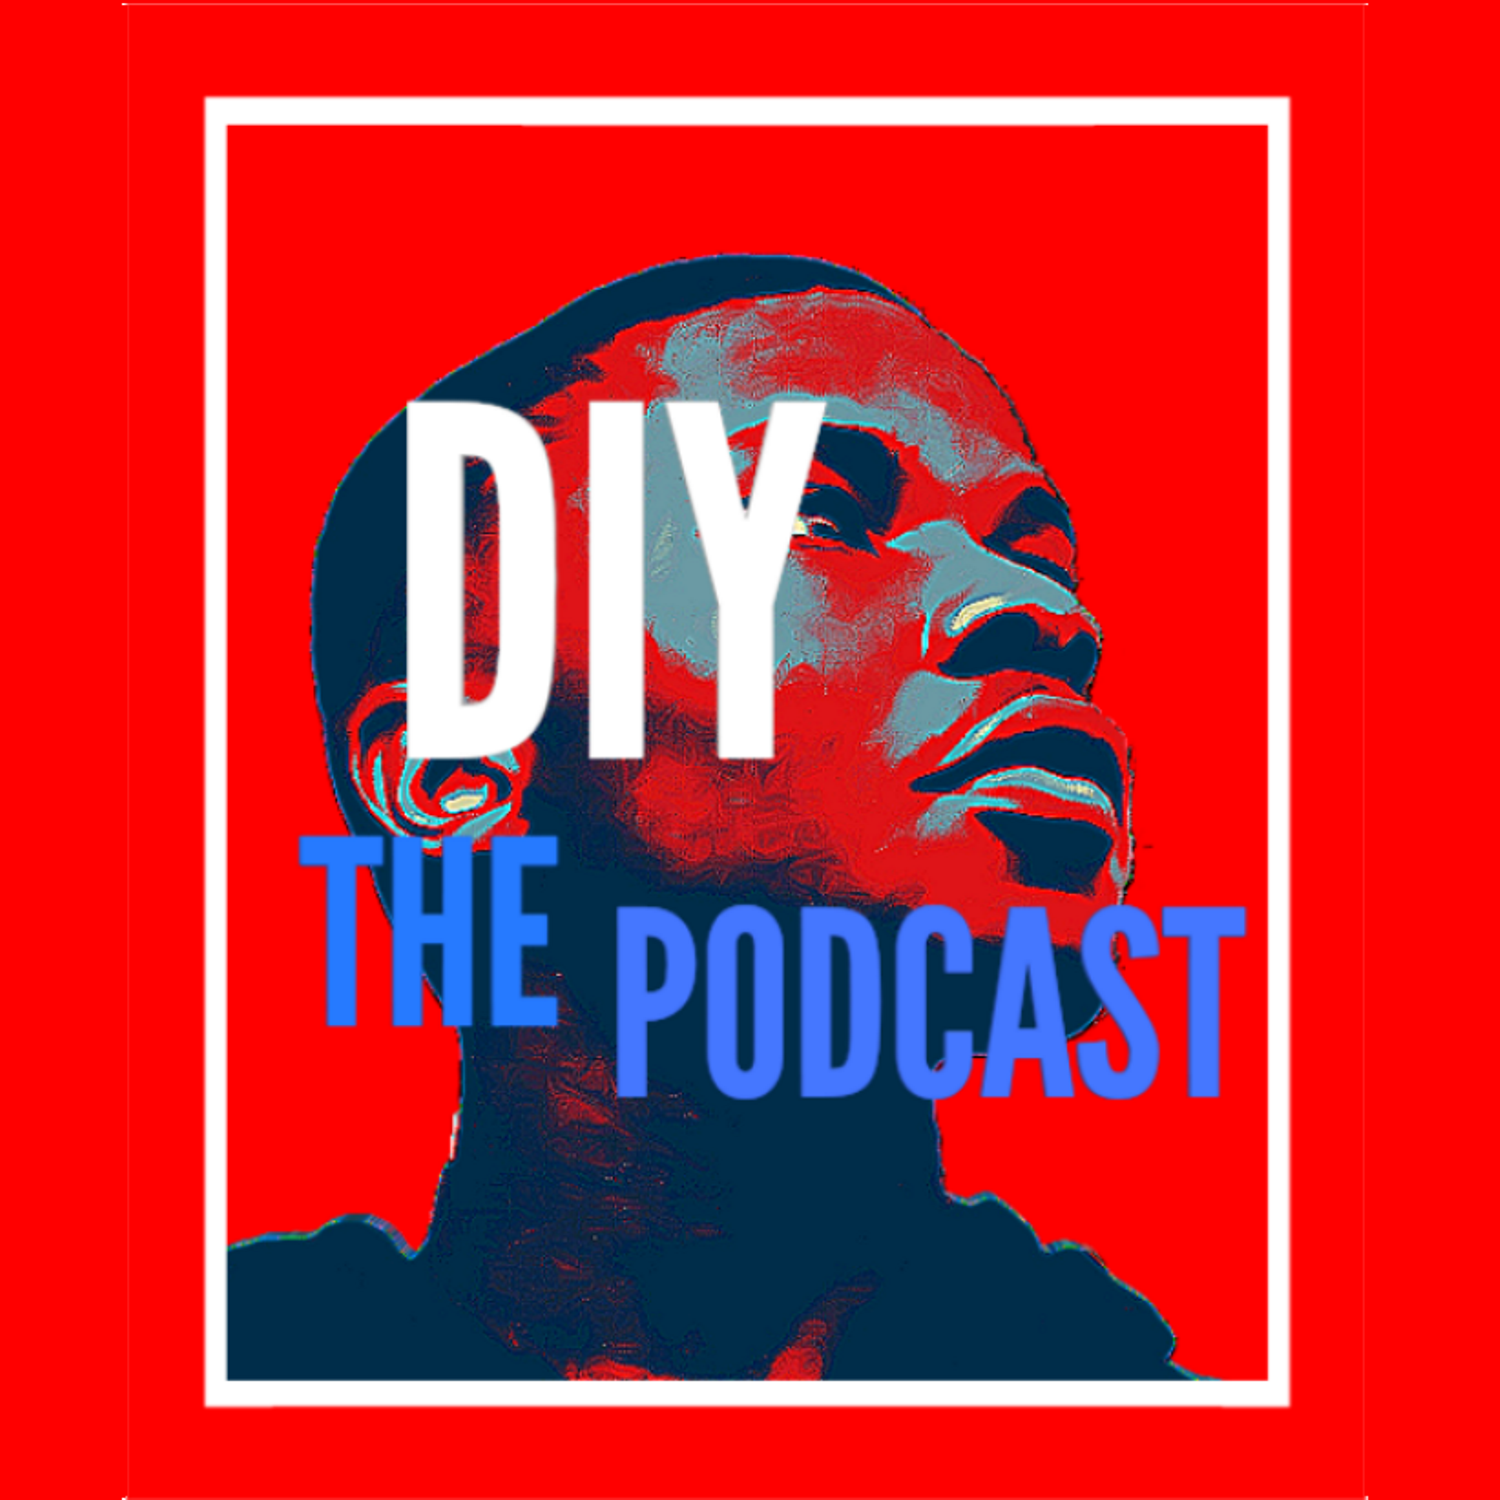 DIY - The Podcast